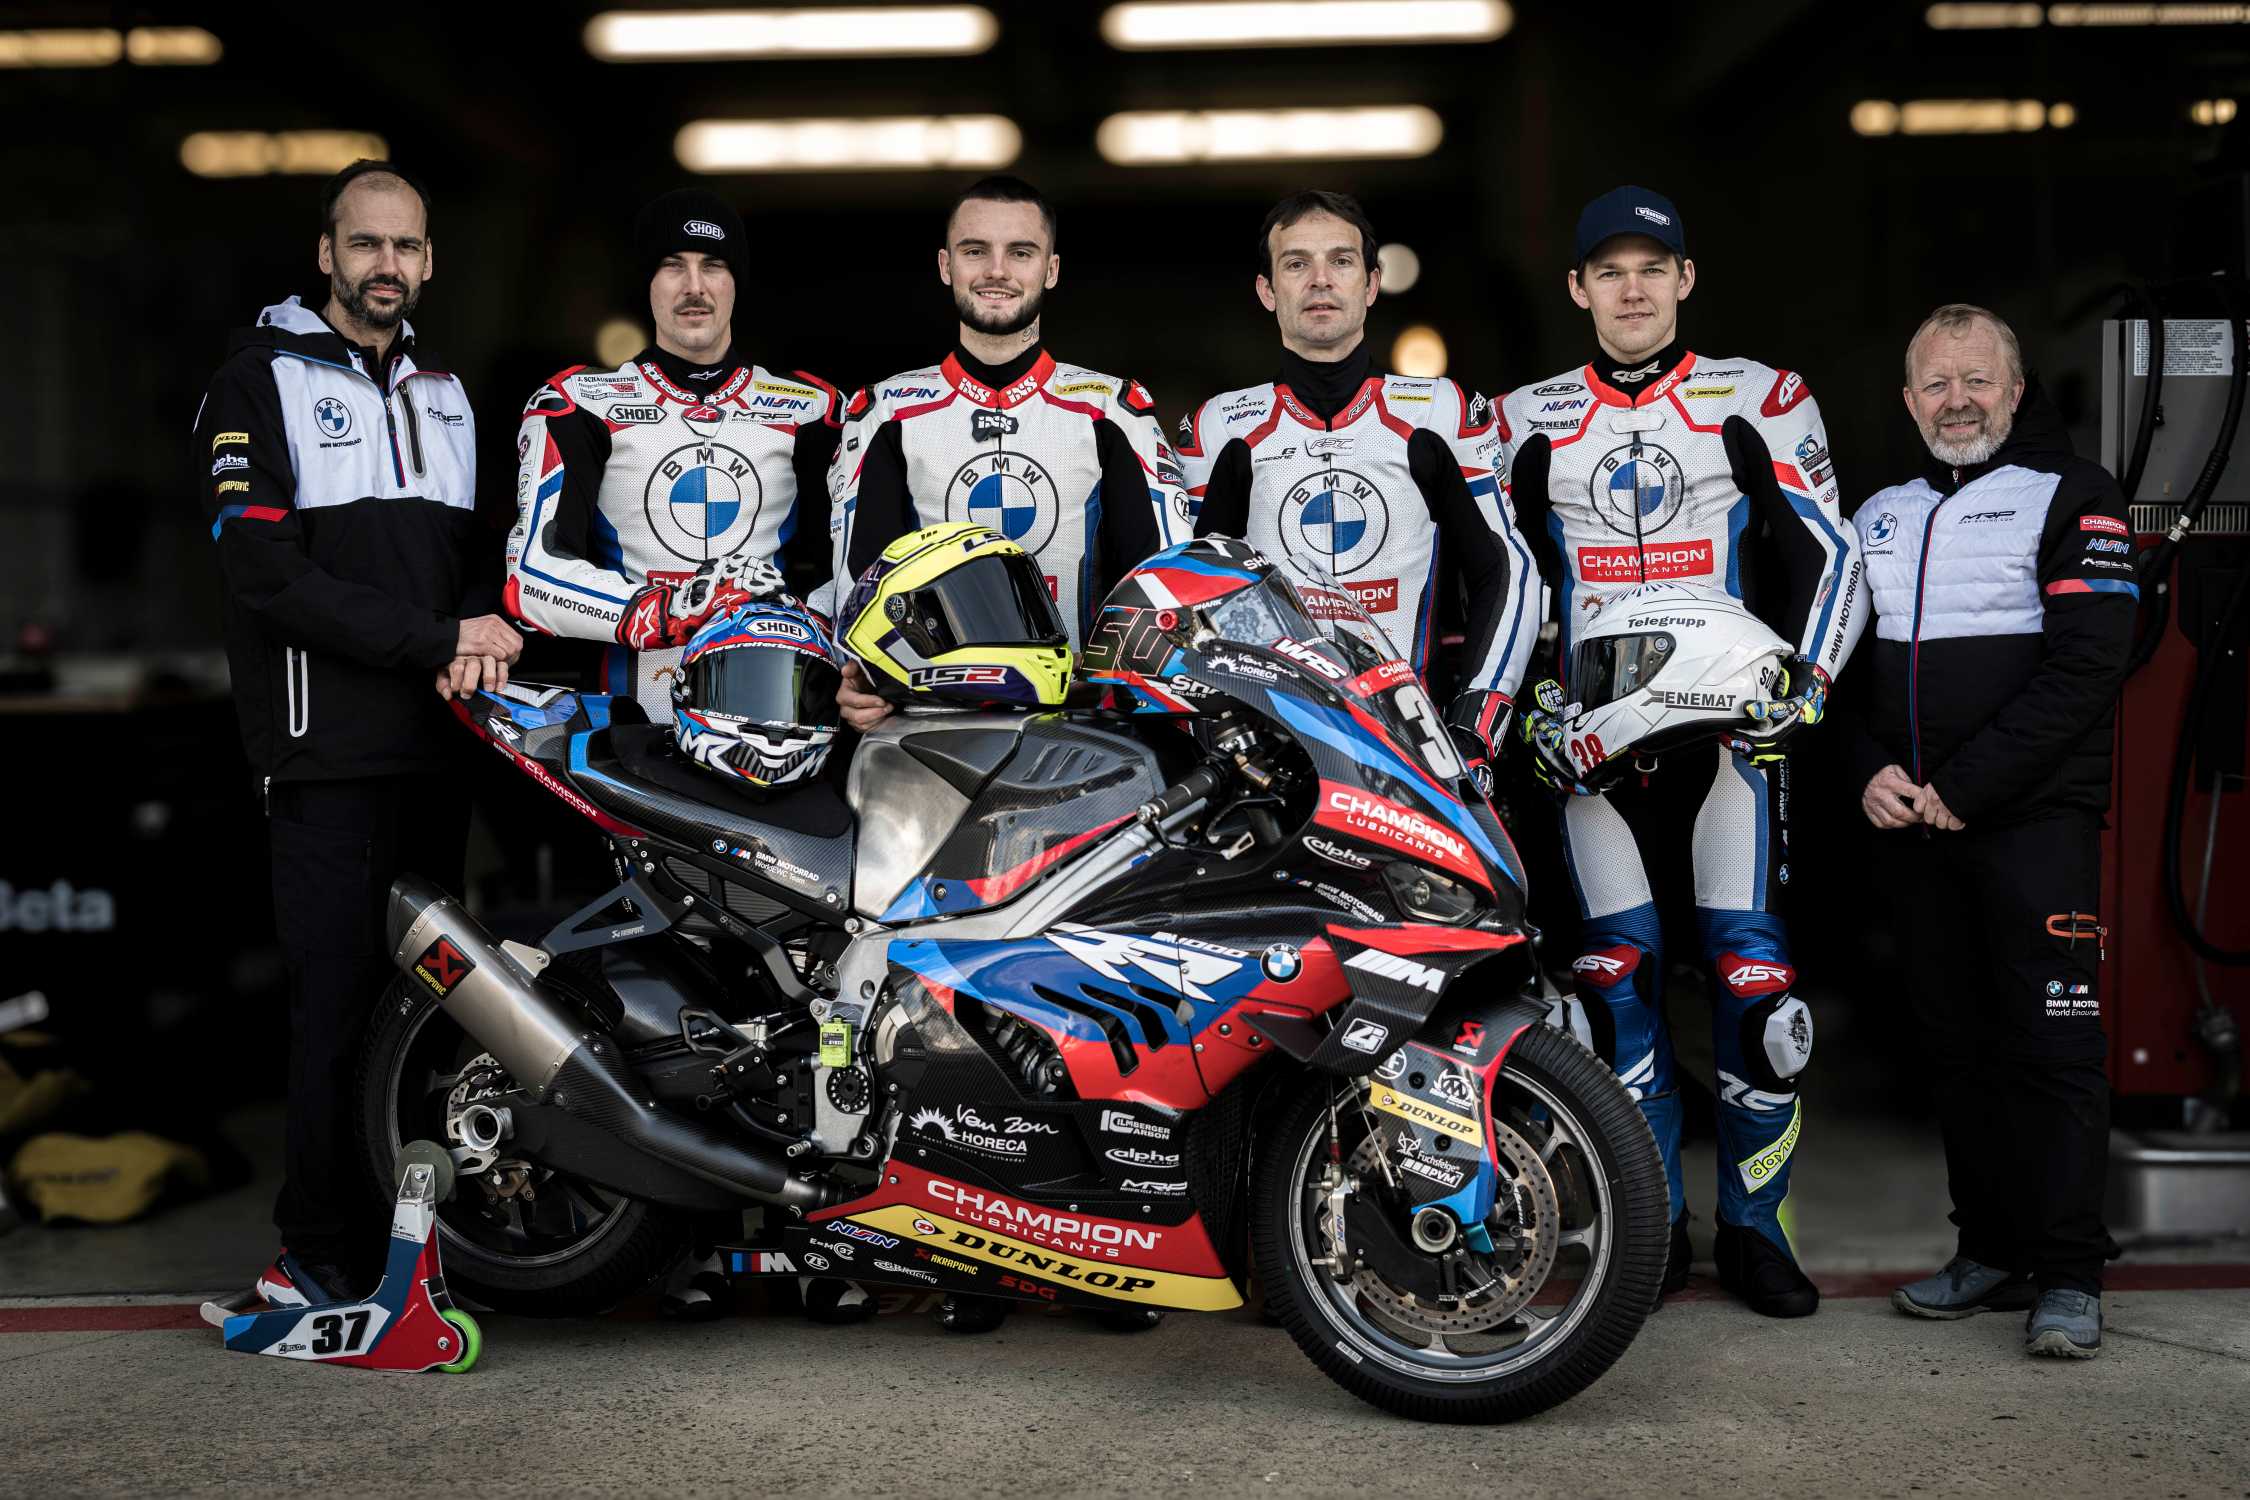 24 Heures Motos: BMW Motorrad Motorsport kicks off its title chase in the FIM Endurance World Championship at Le Mans.